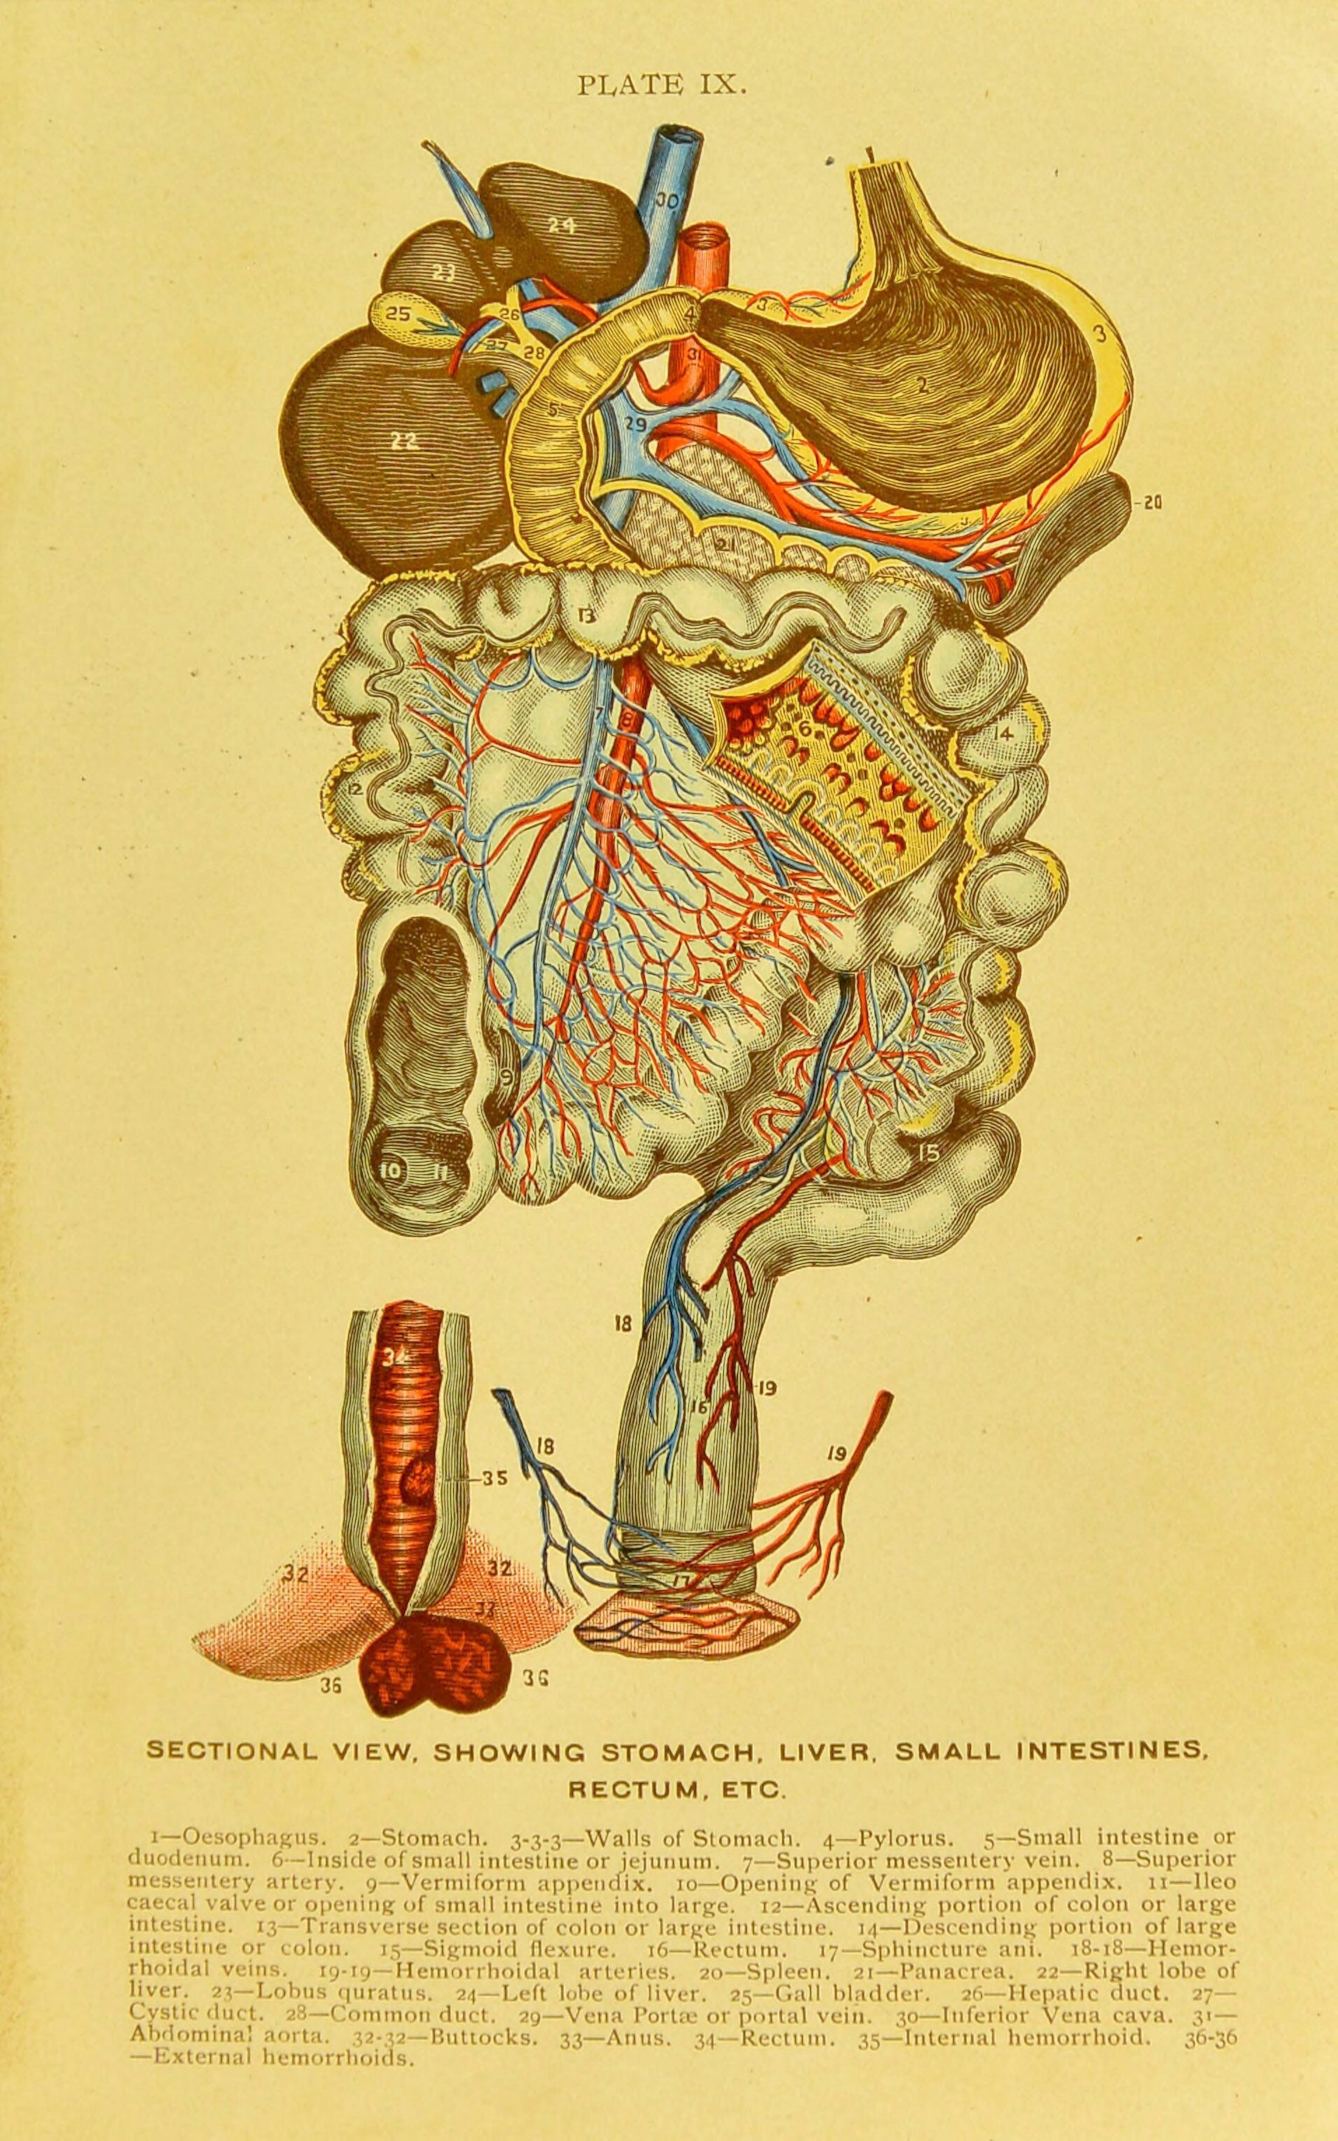 Anatomical plate showing sectional view of the stomach, liver, small intestines and rectum